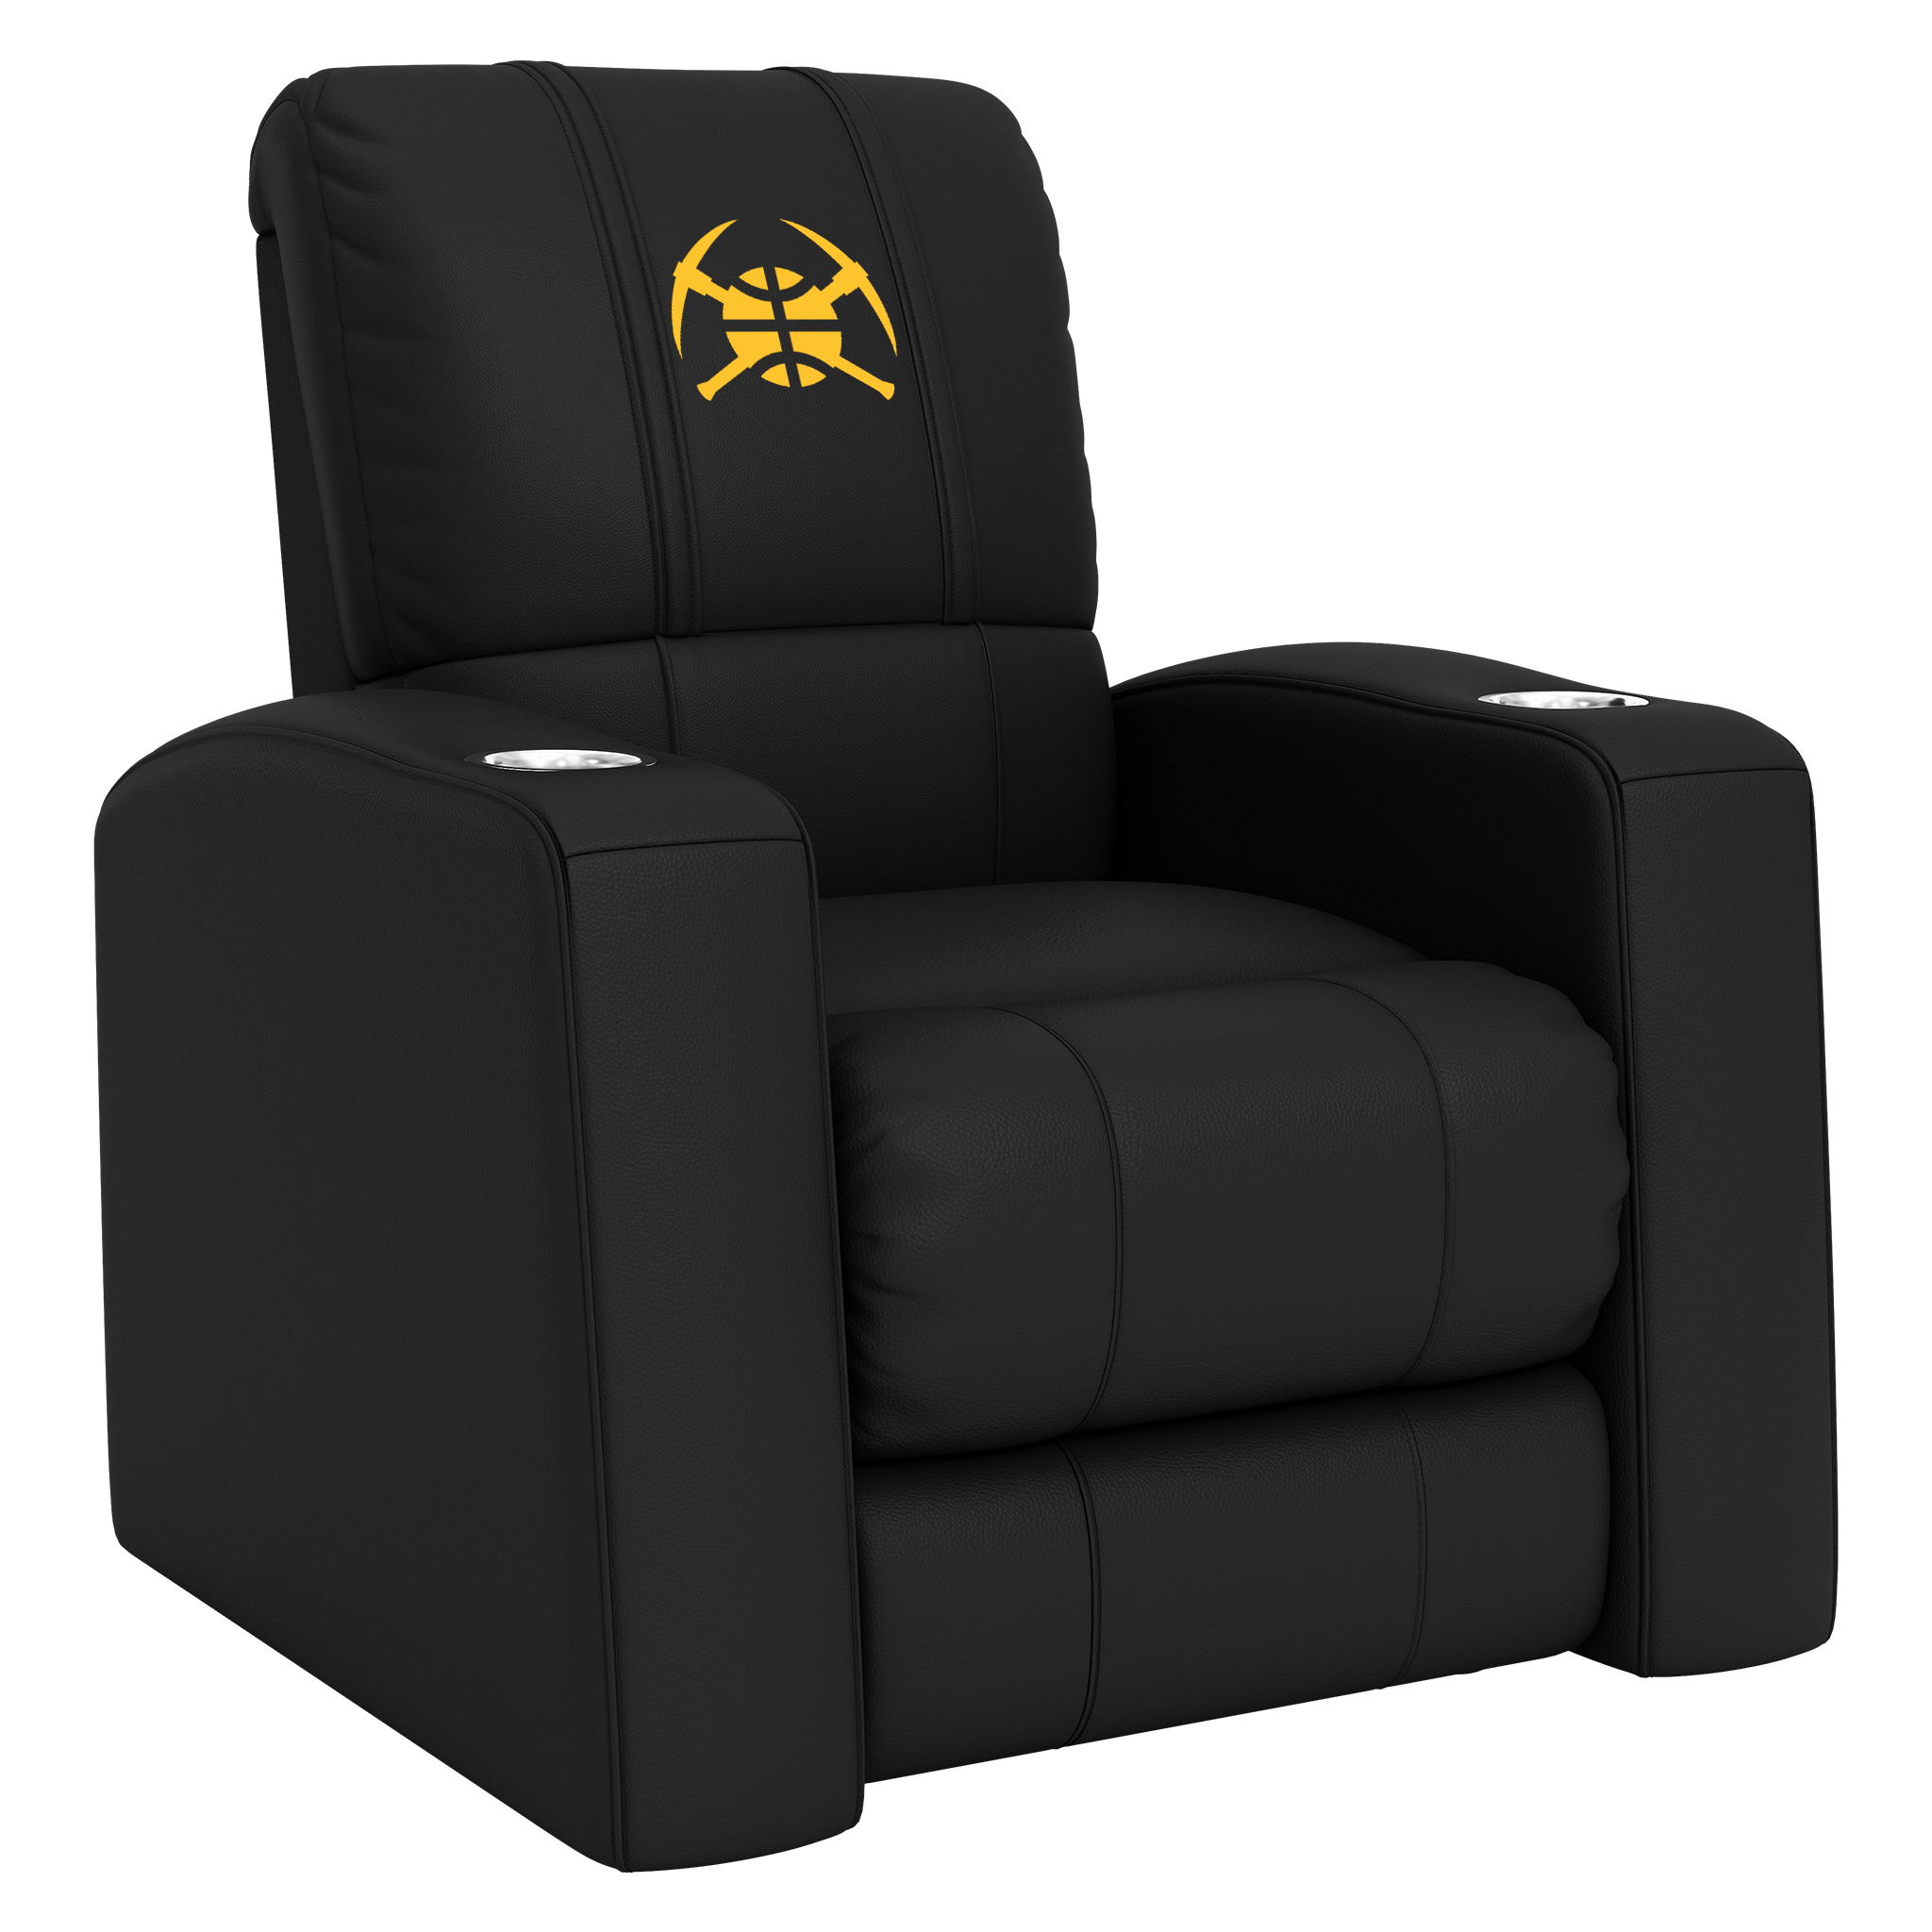 Denver Nuggets Home Theater Recliner with Denver Nuggets Secondary Logo